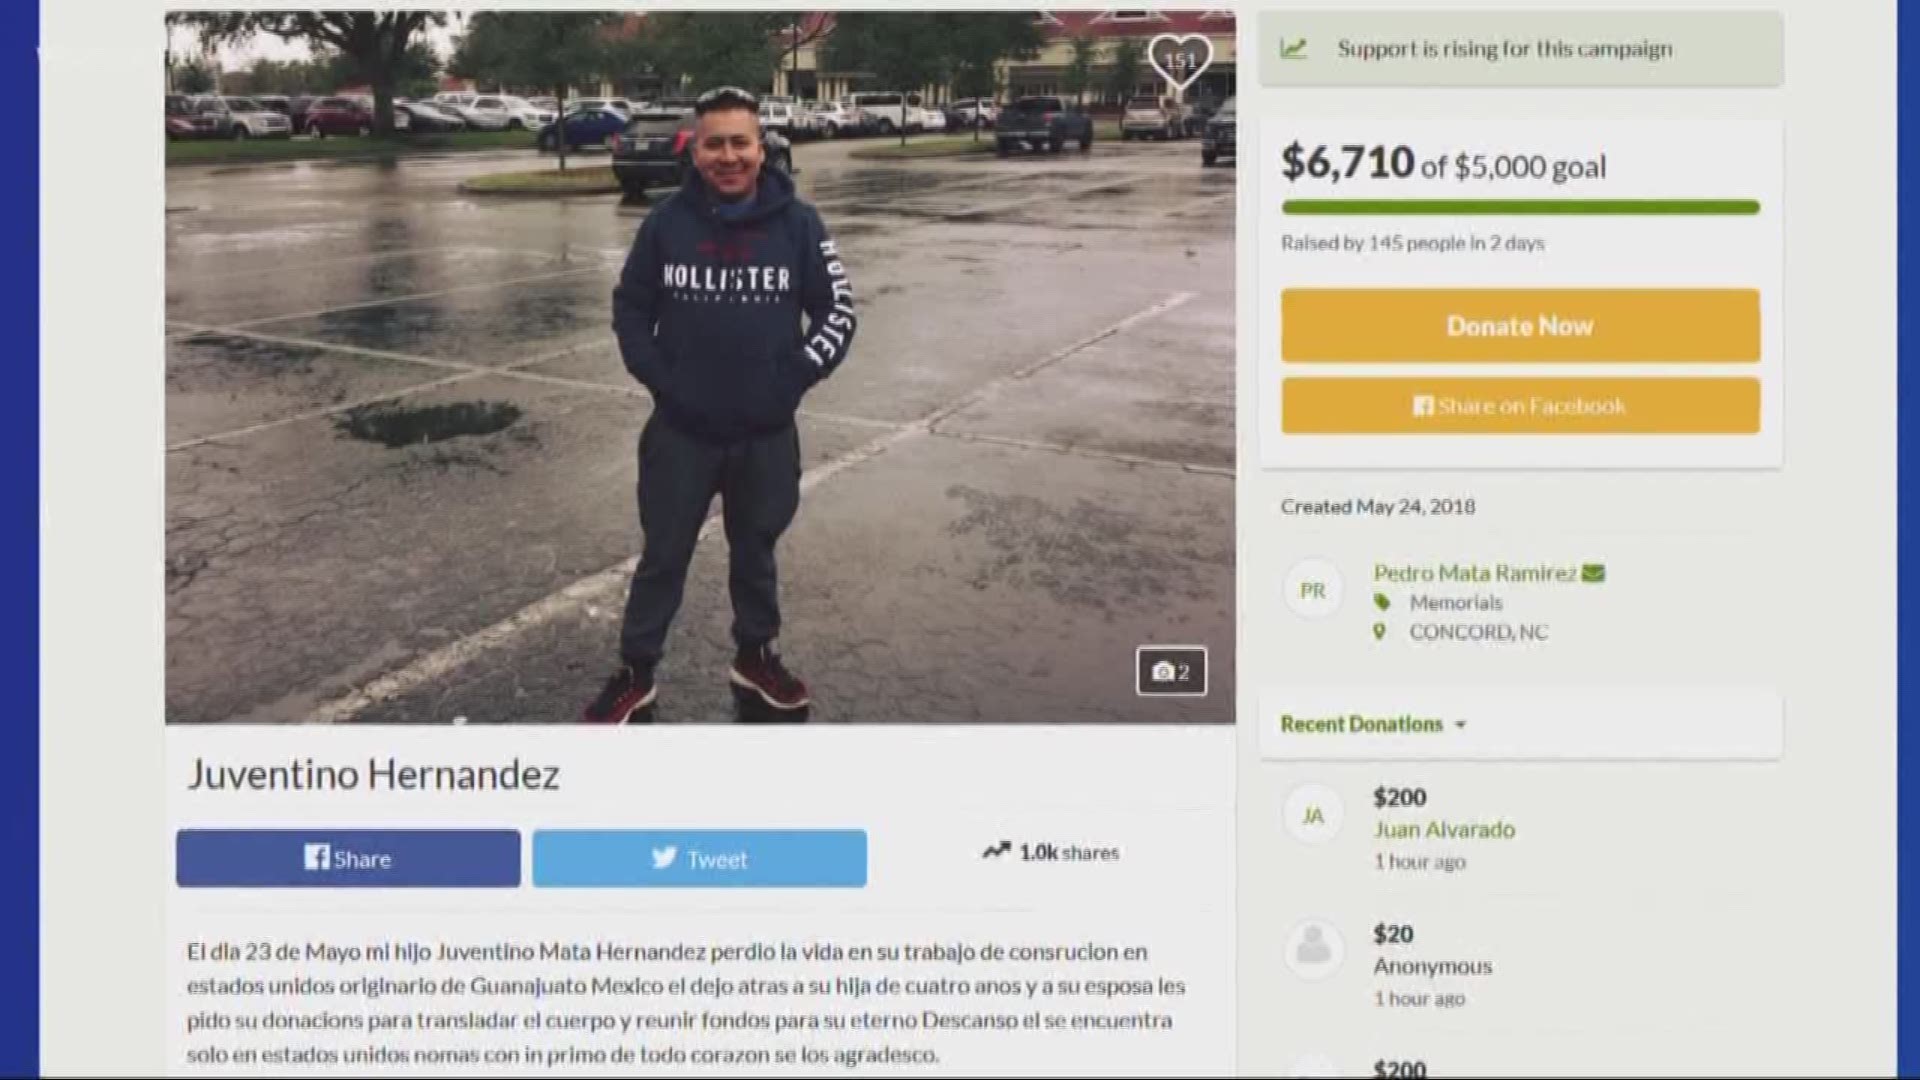 According to the GoFundMe page, the 24-year-old victim left behind a daughter and a wife.